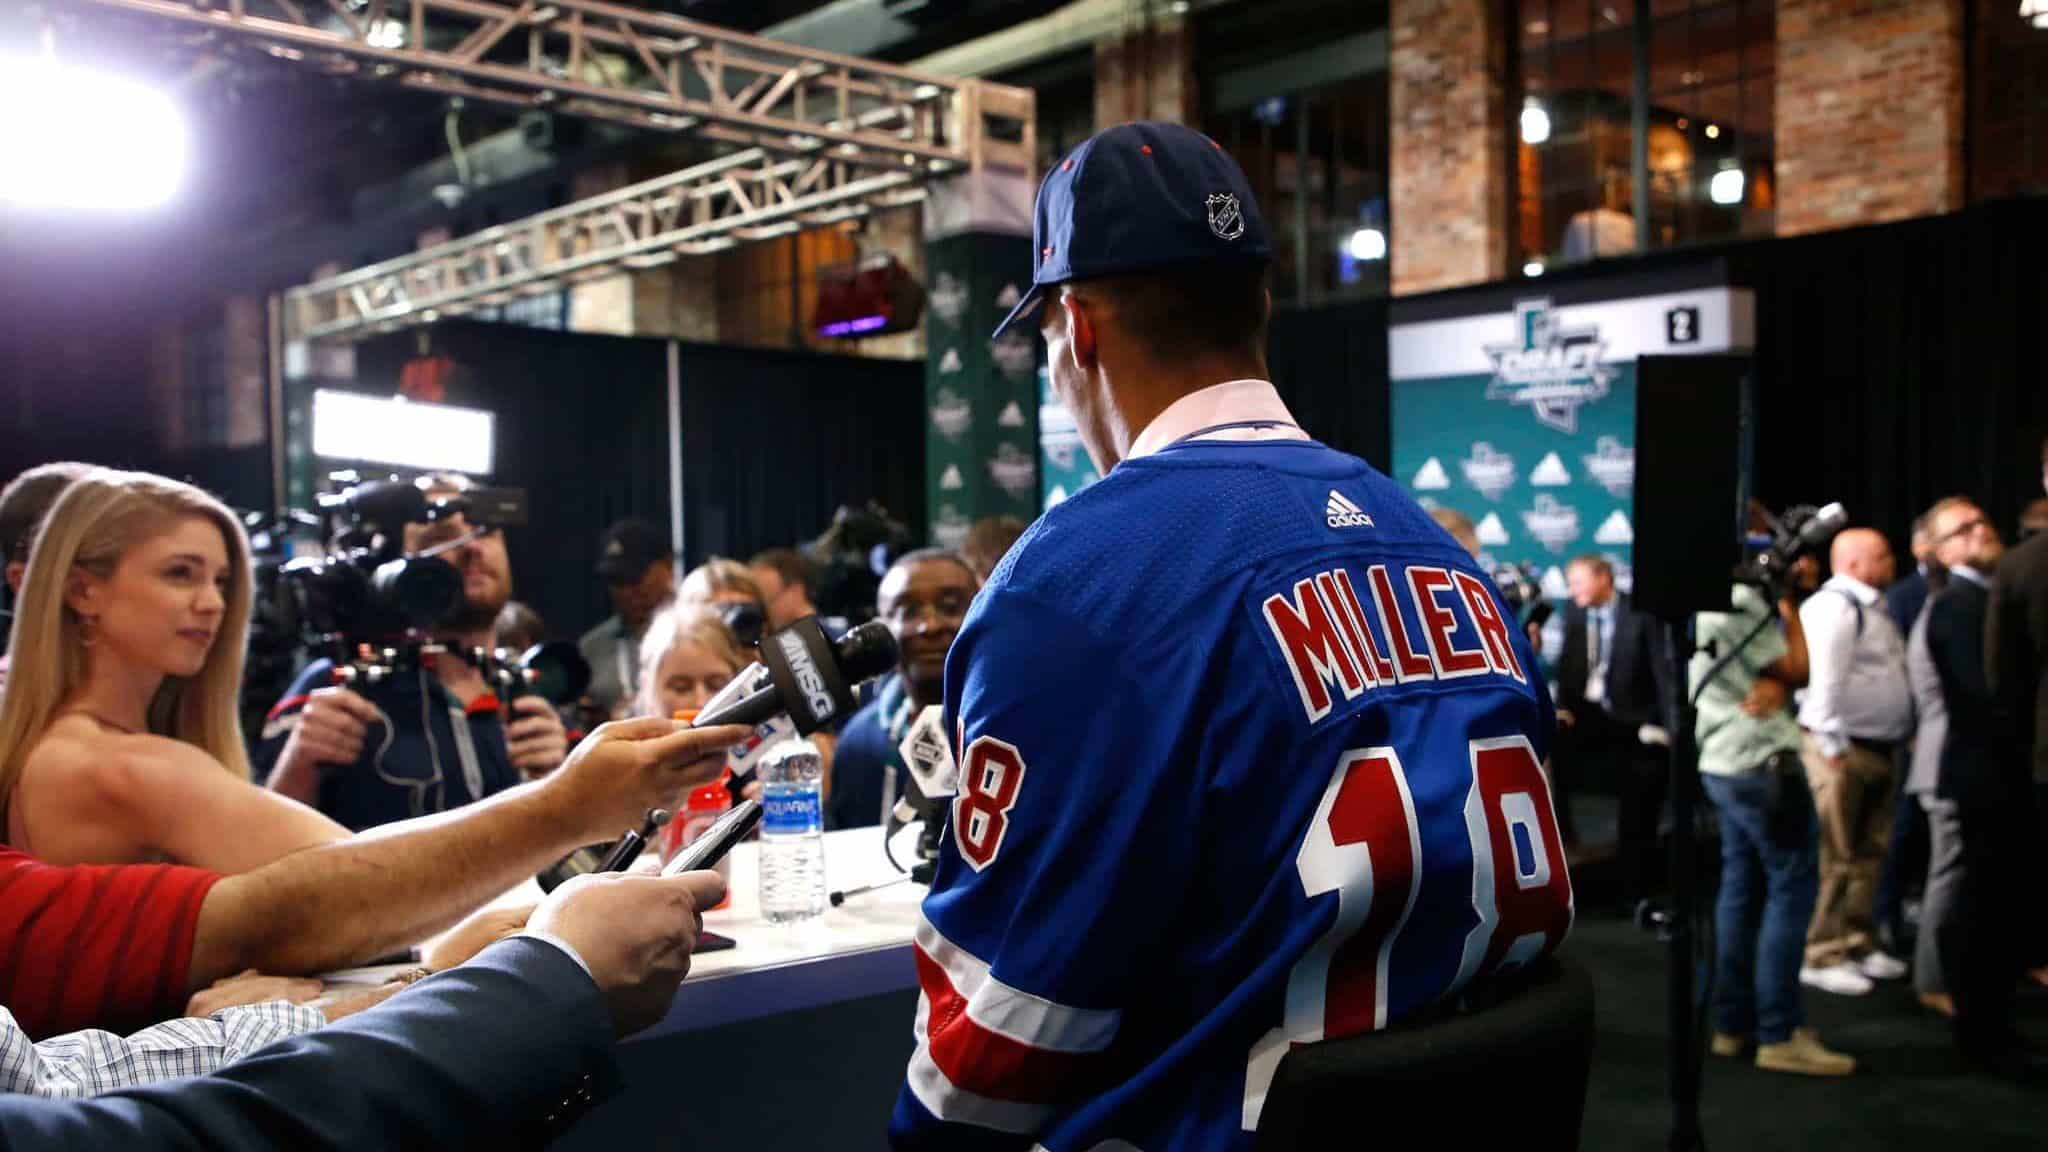 DALLAS, TX - JUNE 22: K'Andre Miller speaks to the media after being selected twenty-second overall by the New York Rangers during the first round of the 2018 NHL Draft at American Airlines Center on June 22, 2018 in Dallas, Texas.